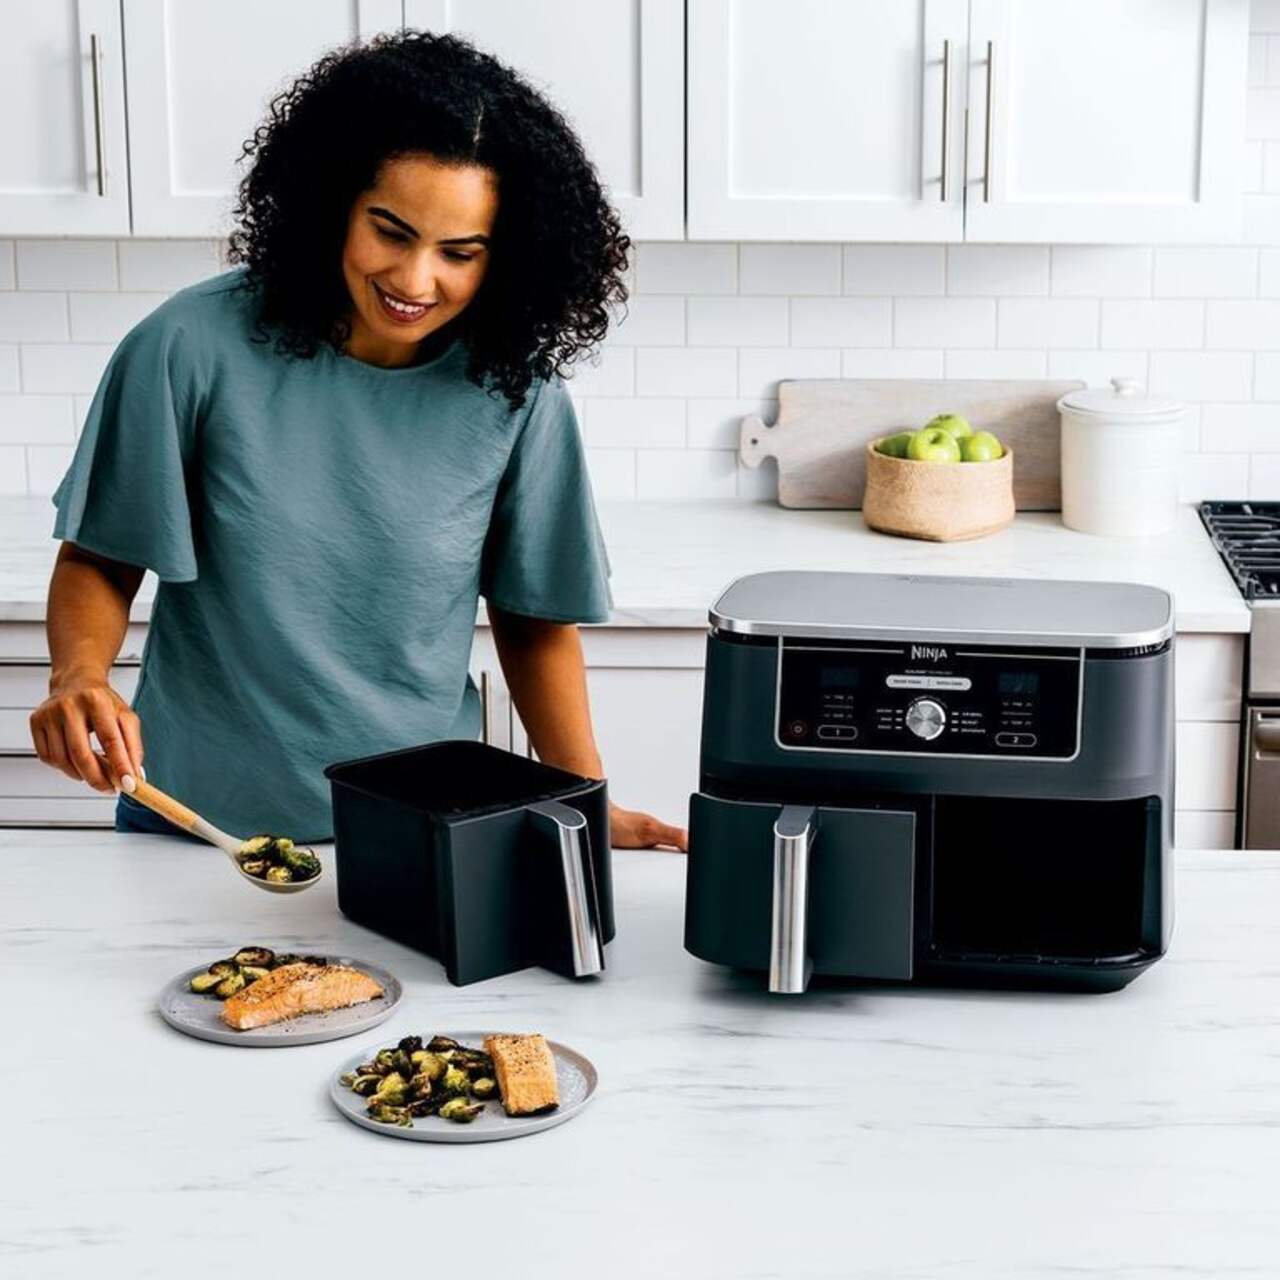 Ninja DZ550 Foodi 10 Quart 6-in-1 DualZone Smart XL Air Fryer with 2  Independent Baskets, Thermometer for Perfect Doneness, Match Cook & Smart  Finish